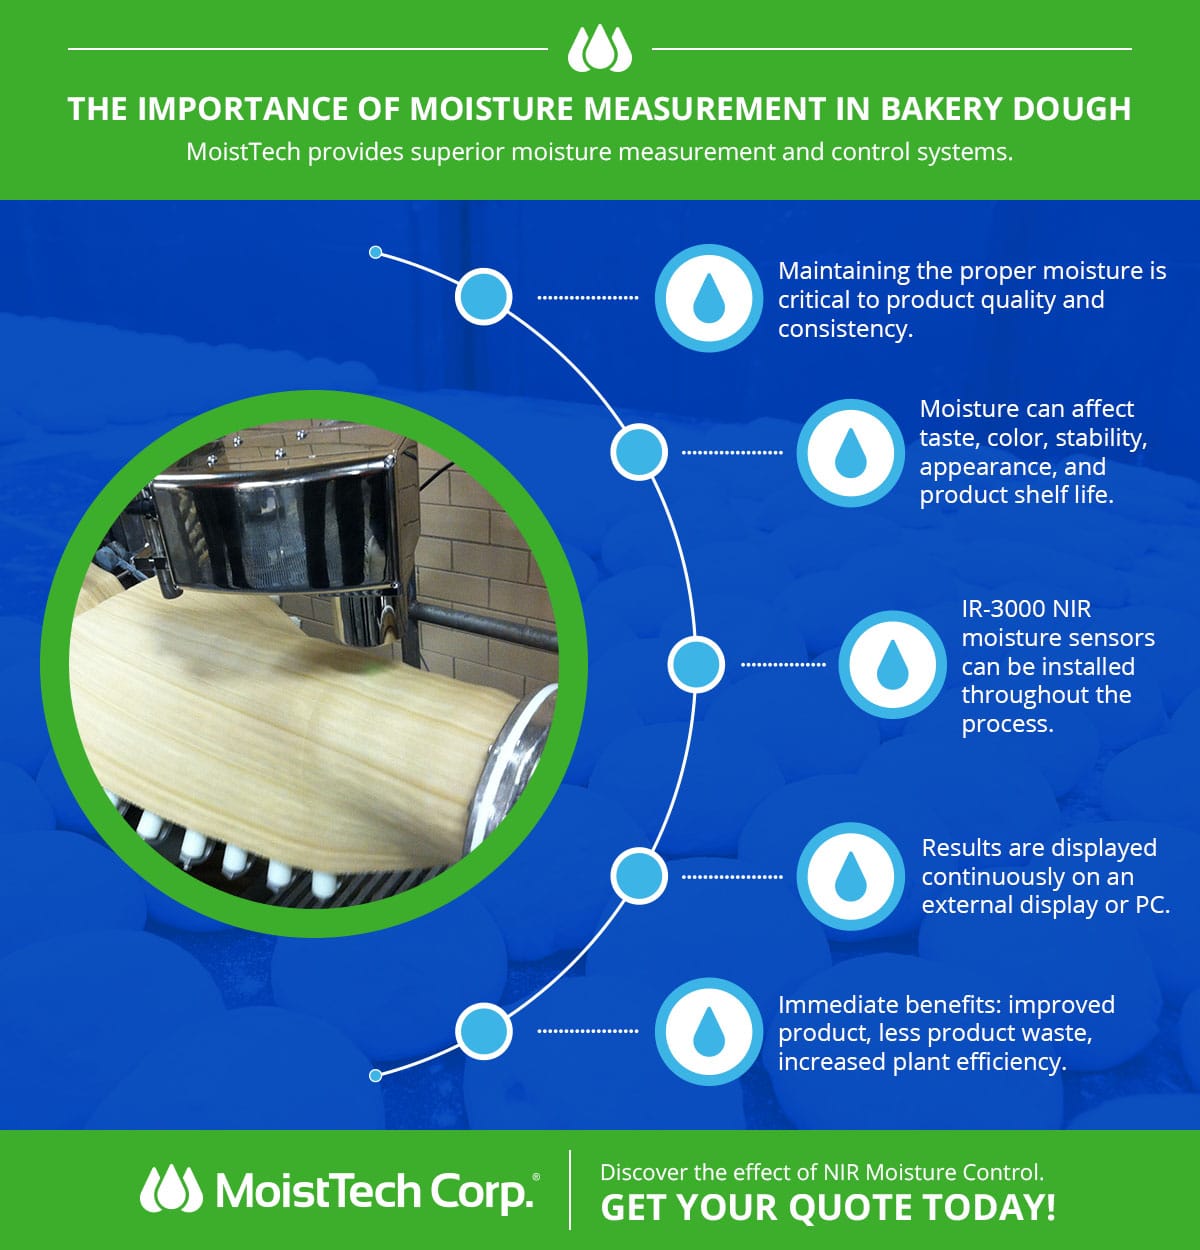 The Importance of Moisture Measurement in Bakery Dough Infographic